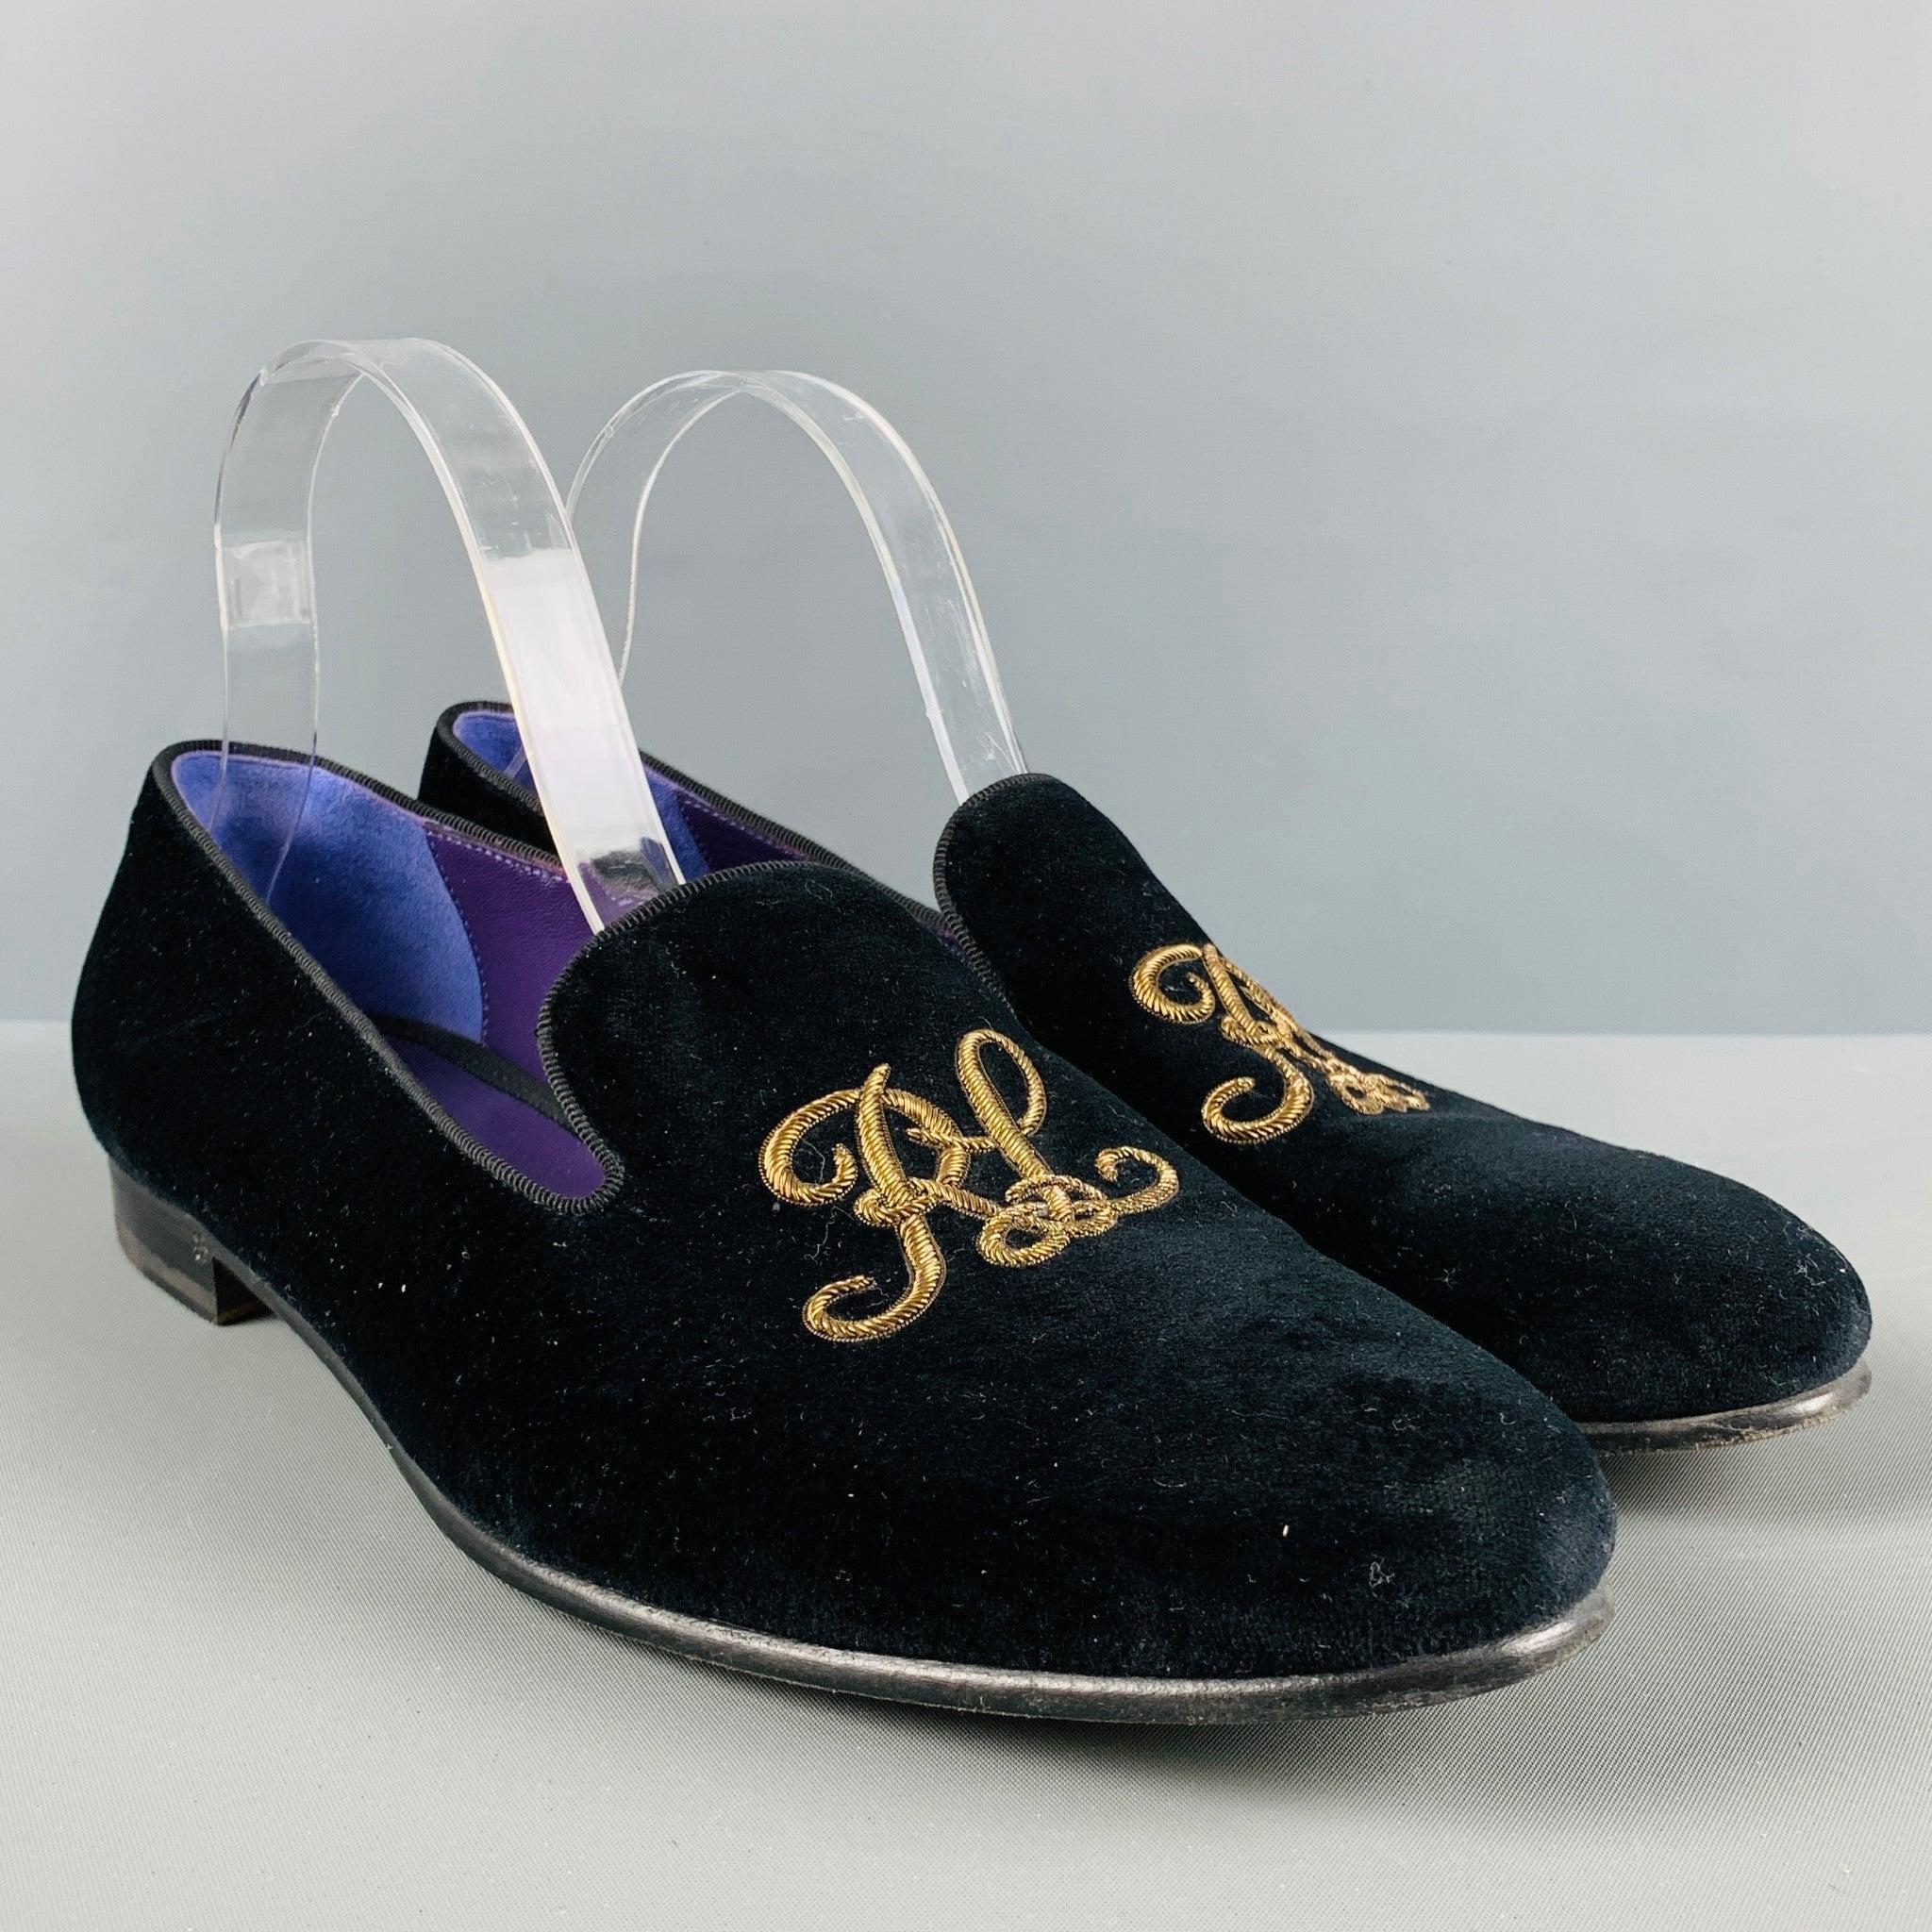 RALPH LAUREN loafers comes in a black velvet with a front embroidered design featuring a slip on style, and a wooden sole. Made in Italy.Very Good Pre- Owned Condition. 

Marked:   800896984003Outsole:11.5 inches  x 3.75 inches  
  
  
 
Reference